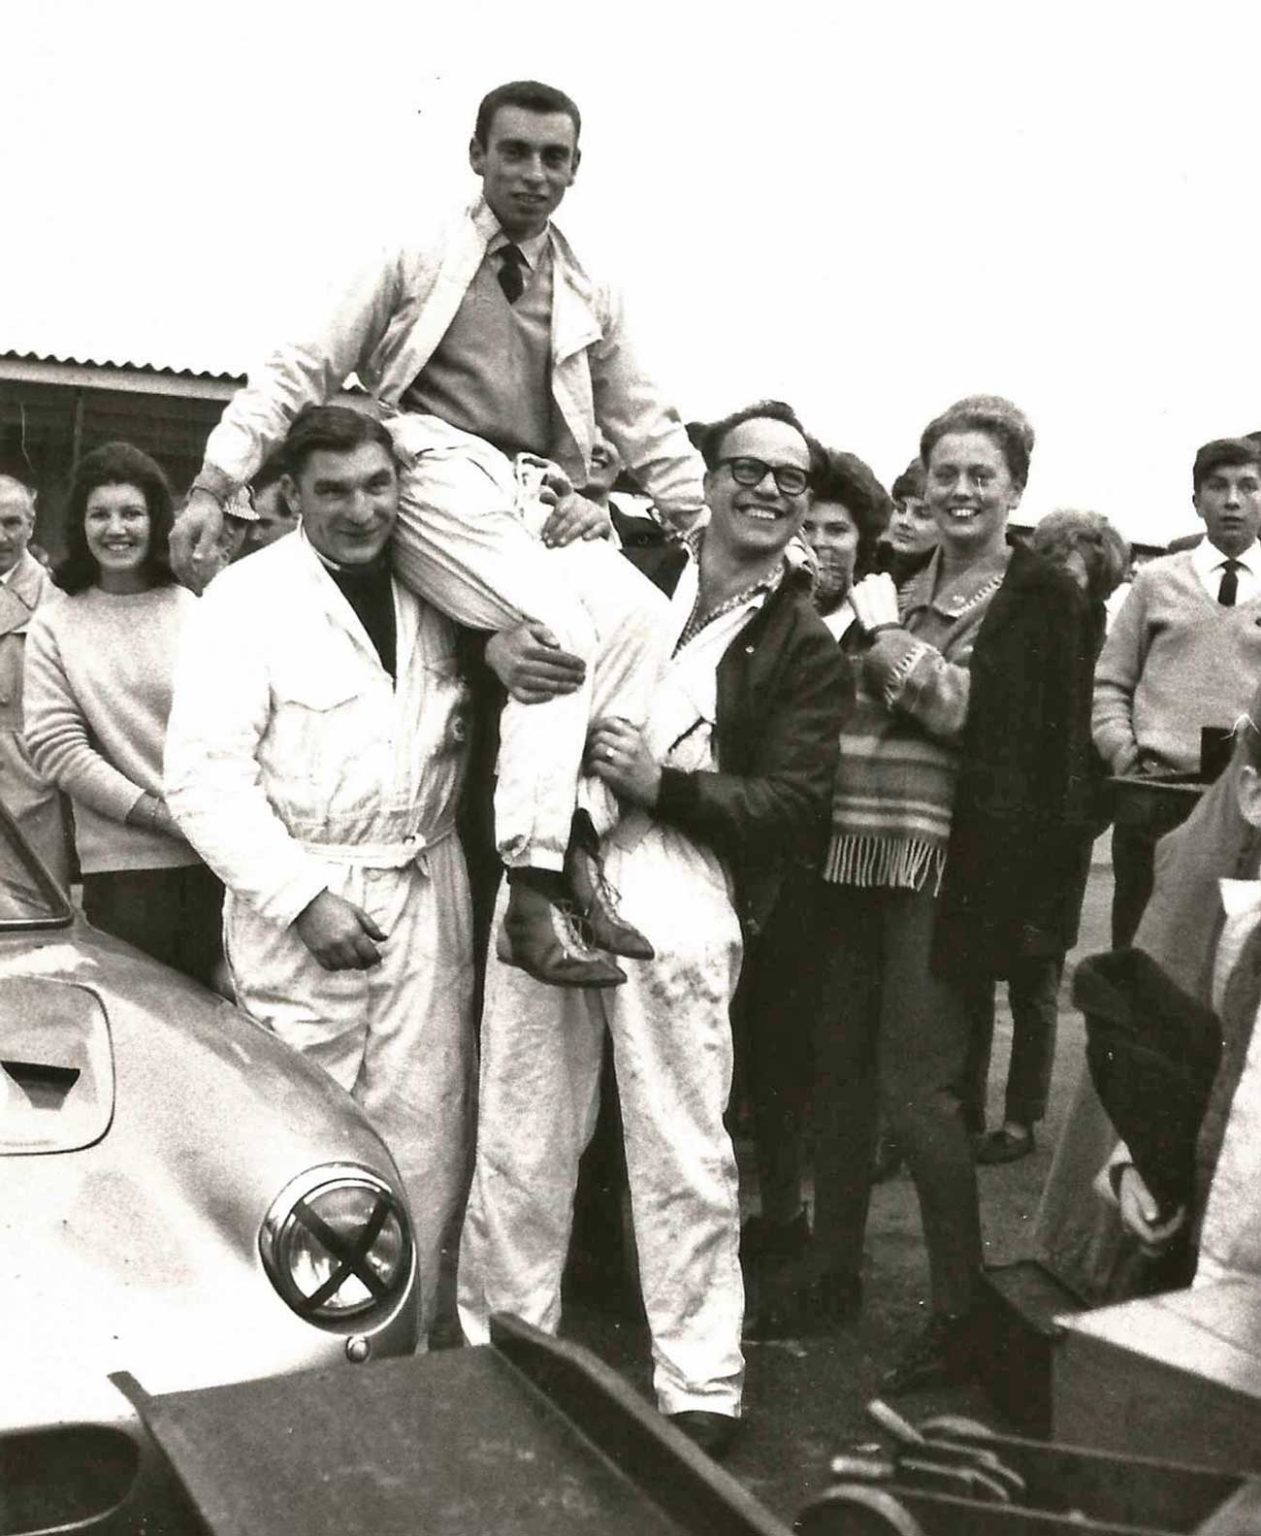 NMM Roger Nathan lecture - Roger Nathan after winning at Brands Hatch 1963